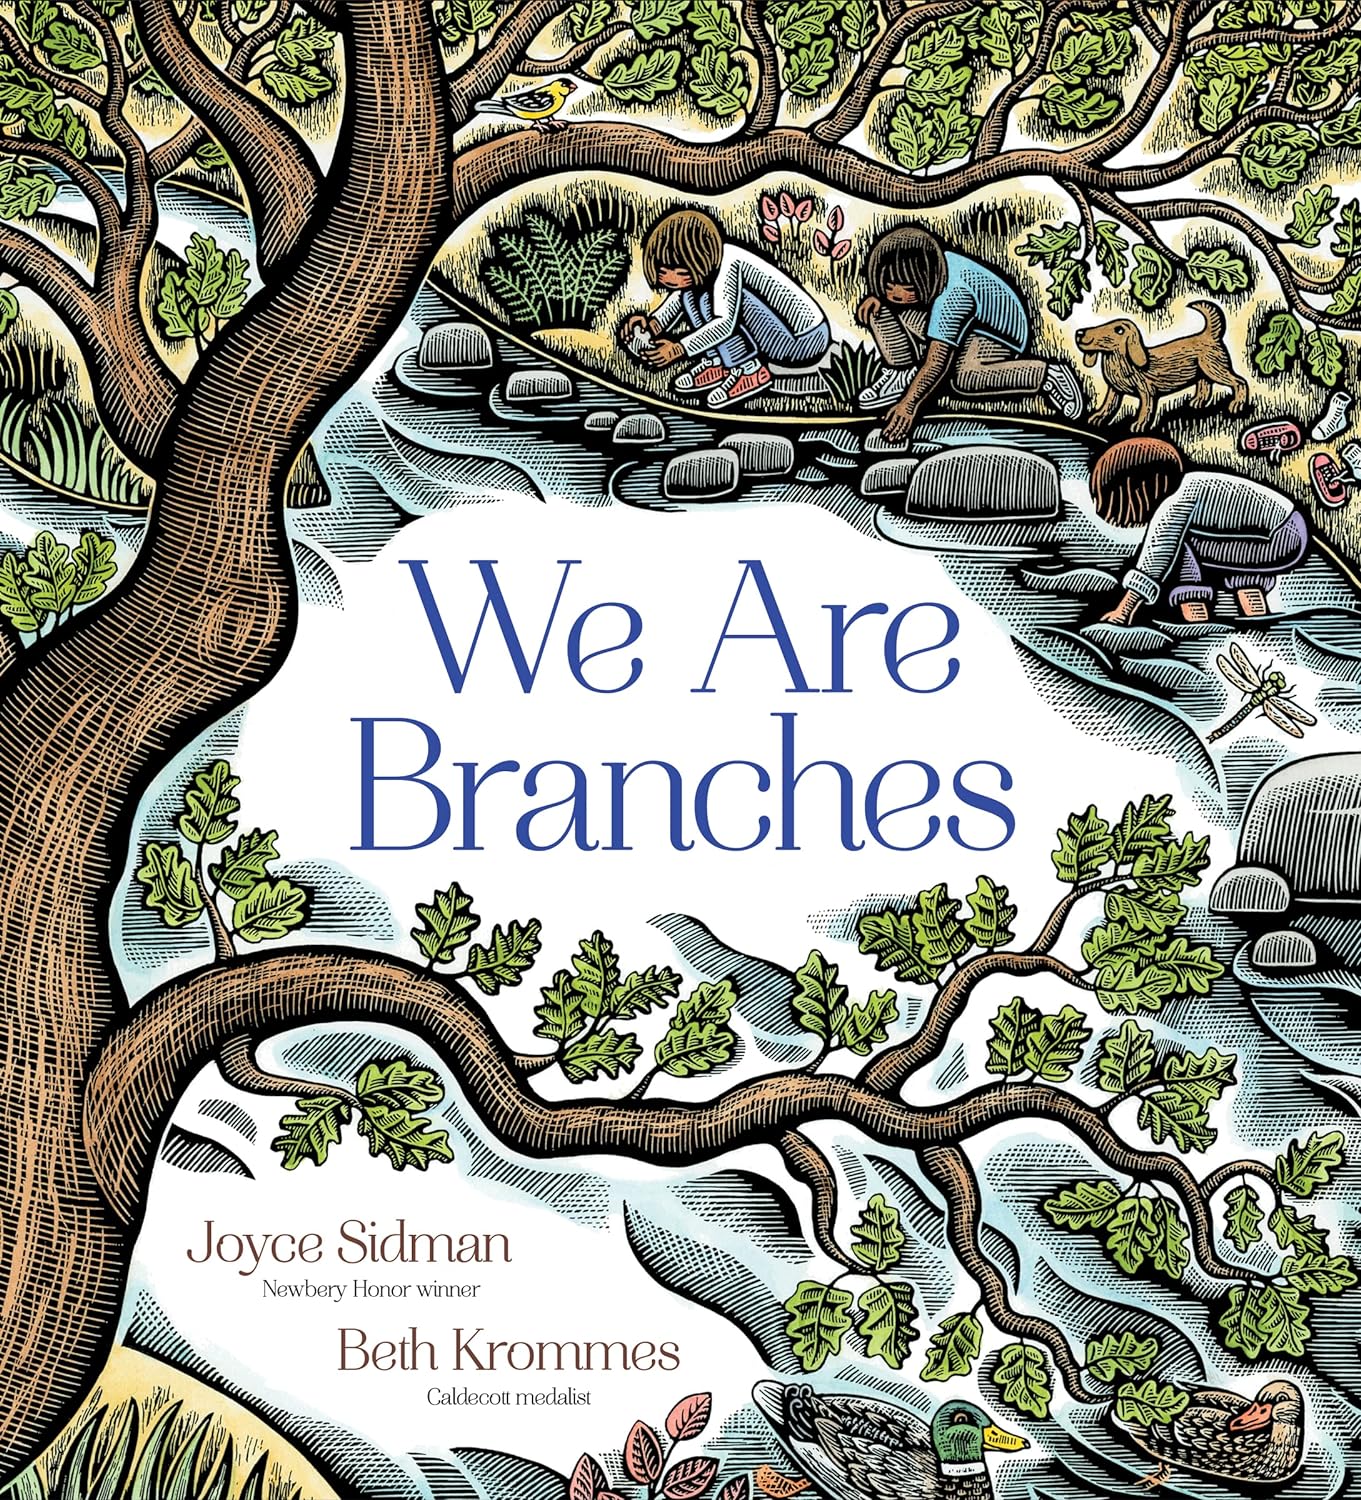 We Are Branches (Hardcover)